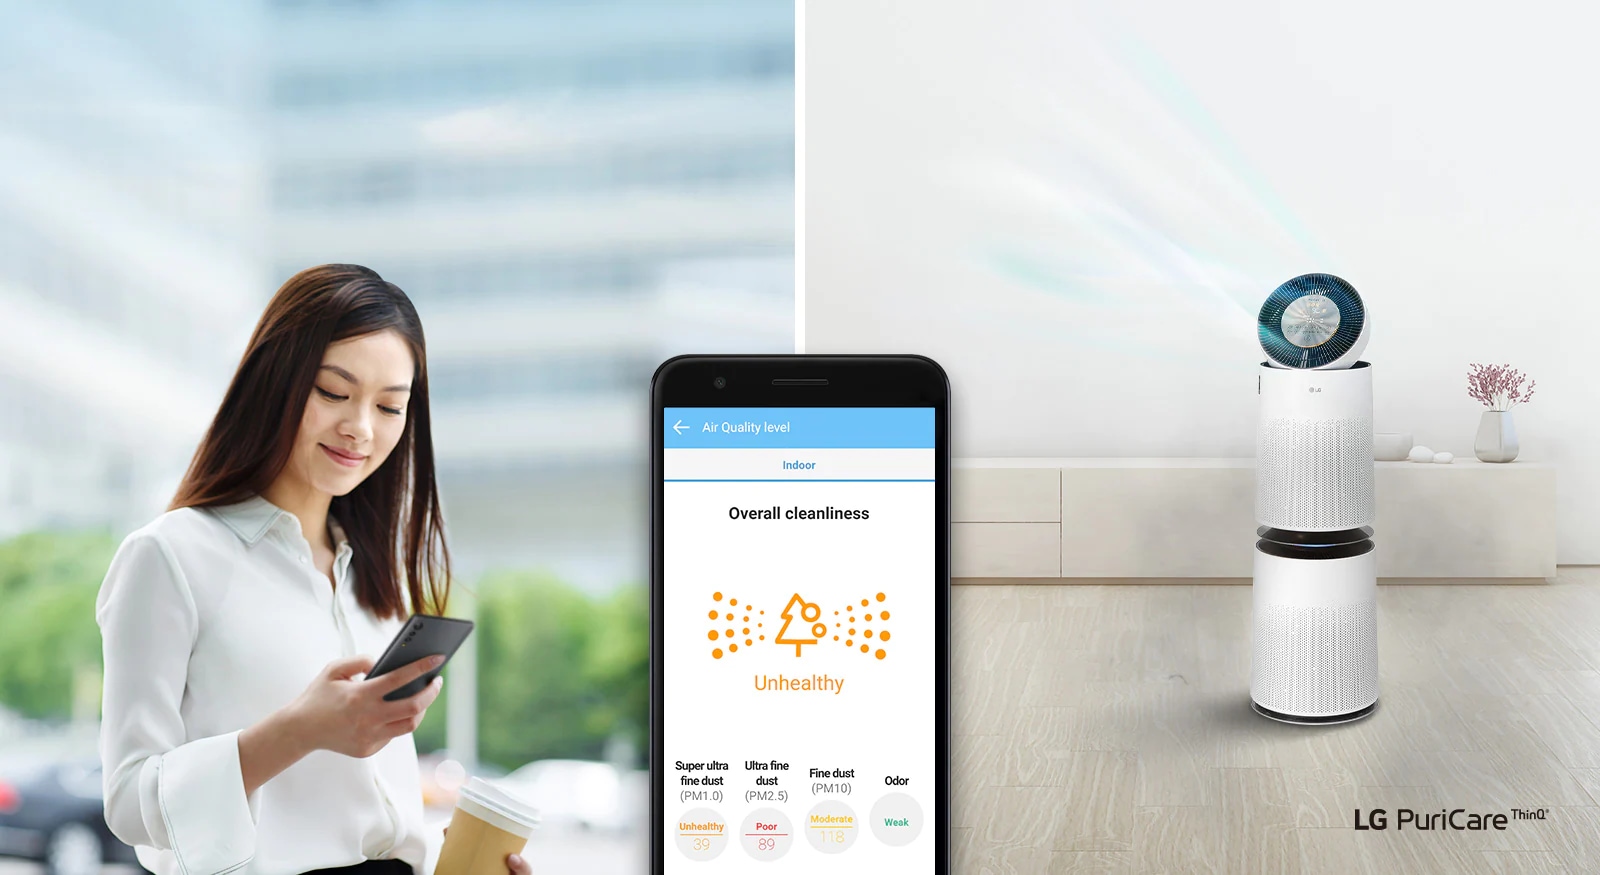 A woman looks at her phone on the left and the air purifier sits on the right. An image of the phone display is in the foreground showing the air quality and other statistics in the LG ThinQ app.